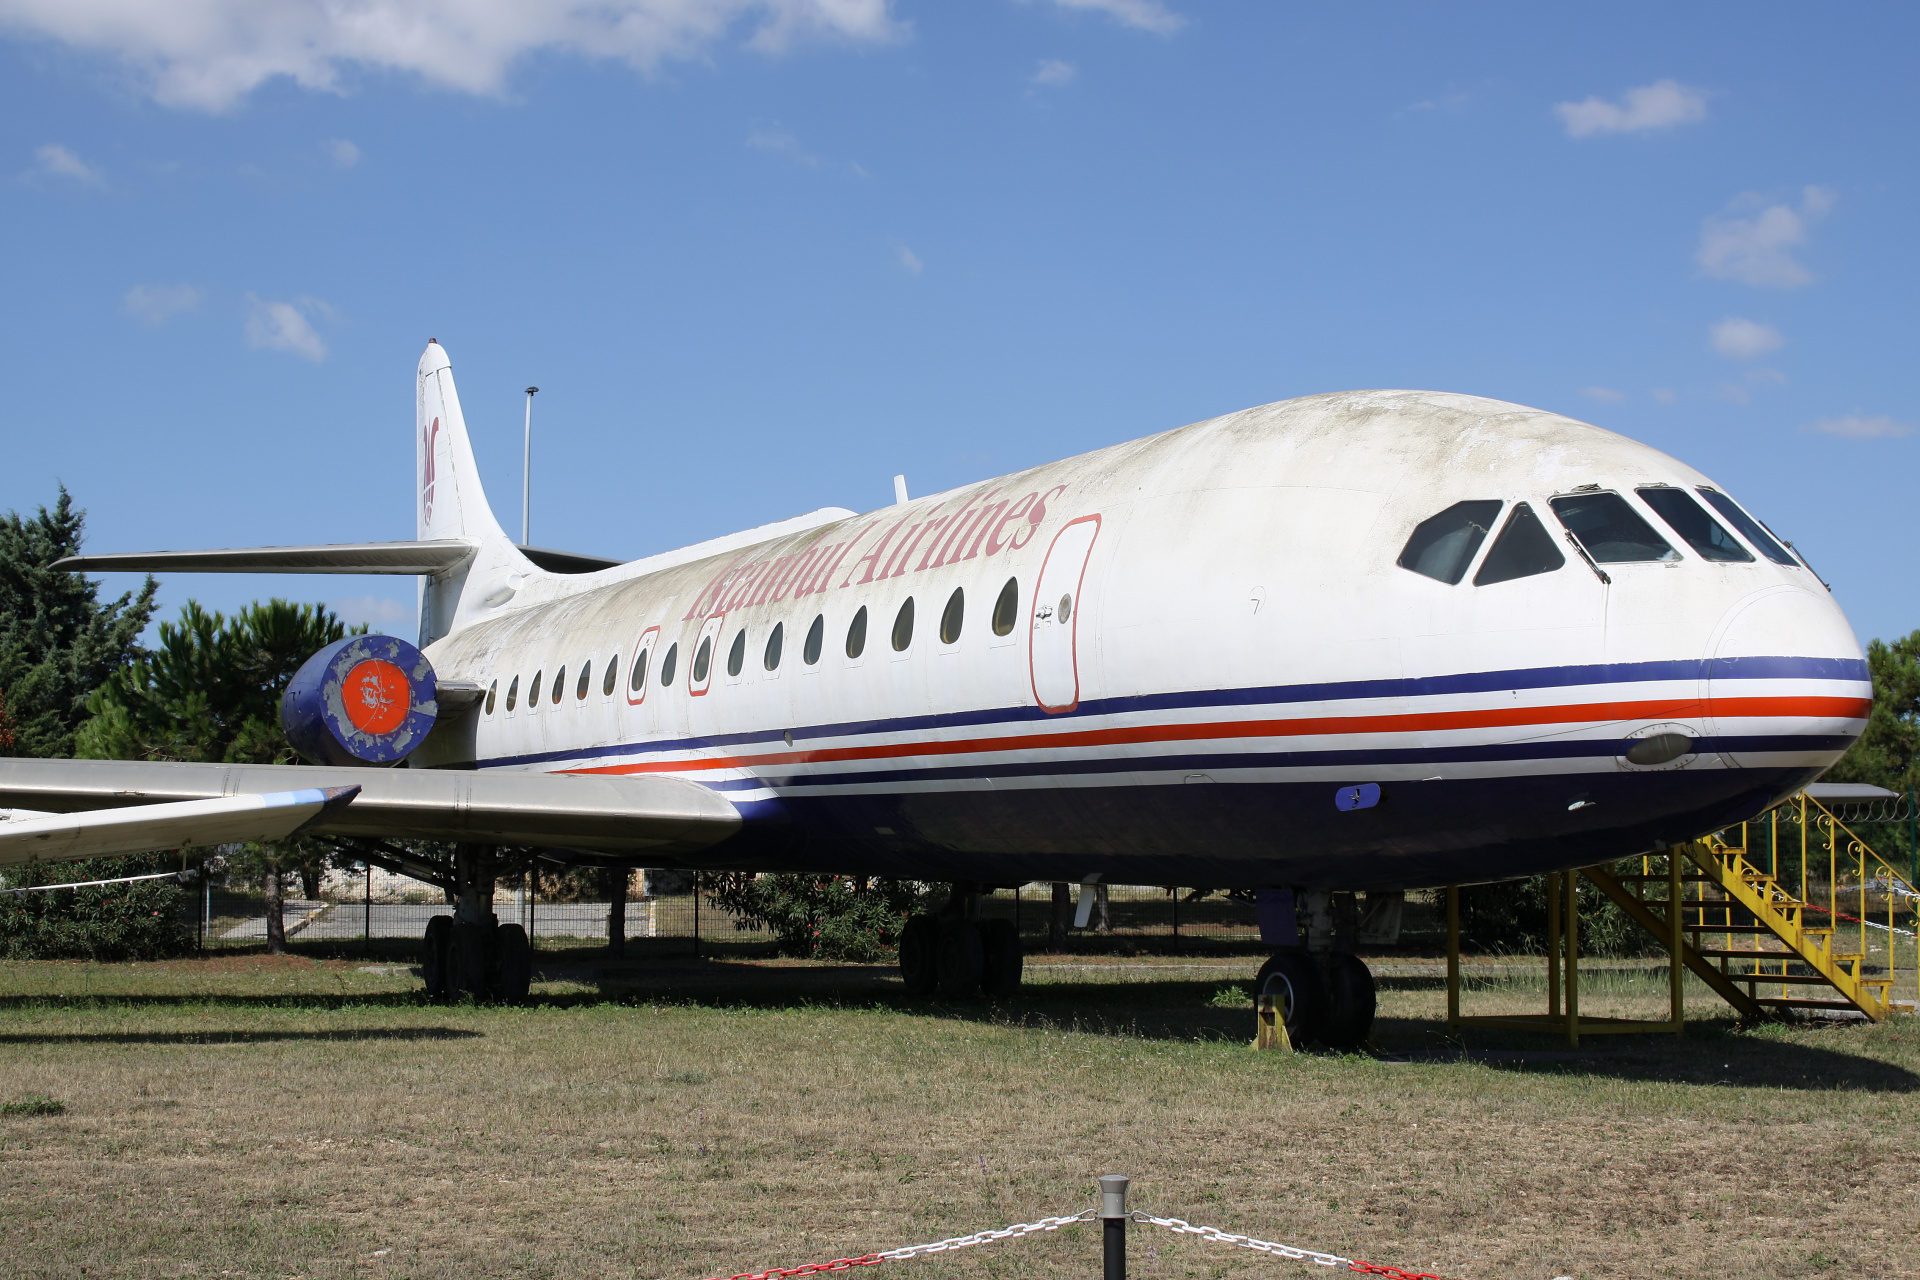 Aerospatiale (Sud Aviation) SE-210 Caravelle 10B1R, TC-ABA, Istanbul Airlines (Aircraft » Turkish Air Force Museum)